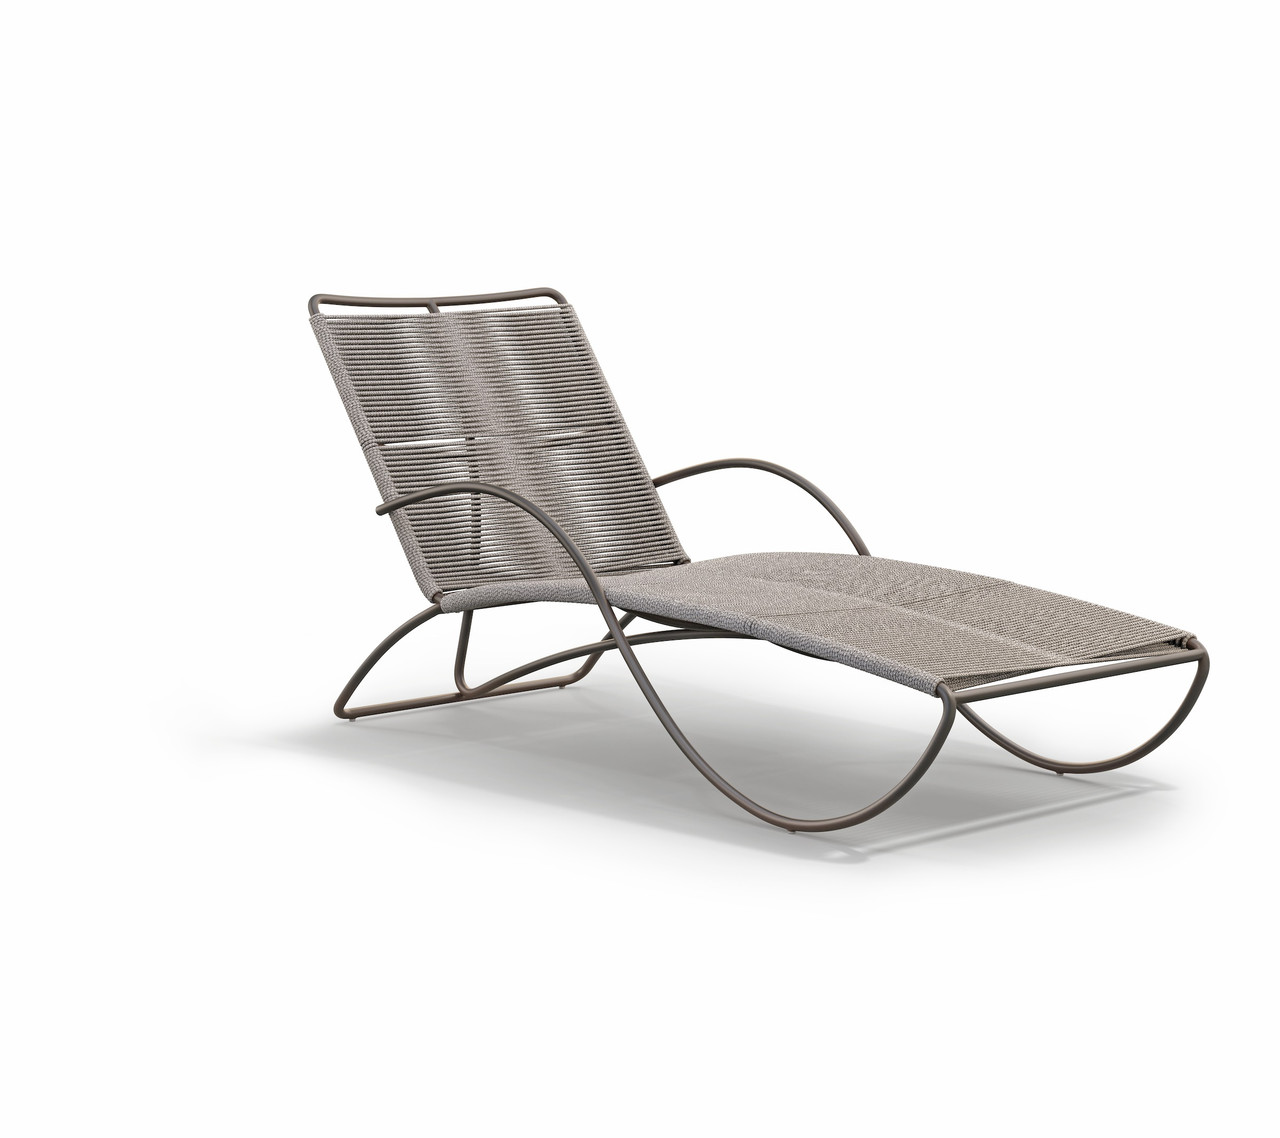 Brown Walter Lamb Chaise Lounge Into The Garden Outdoor